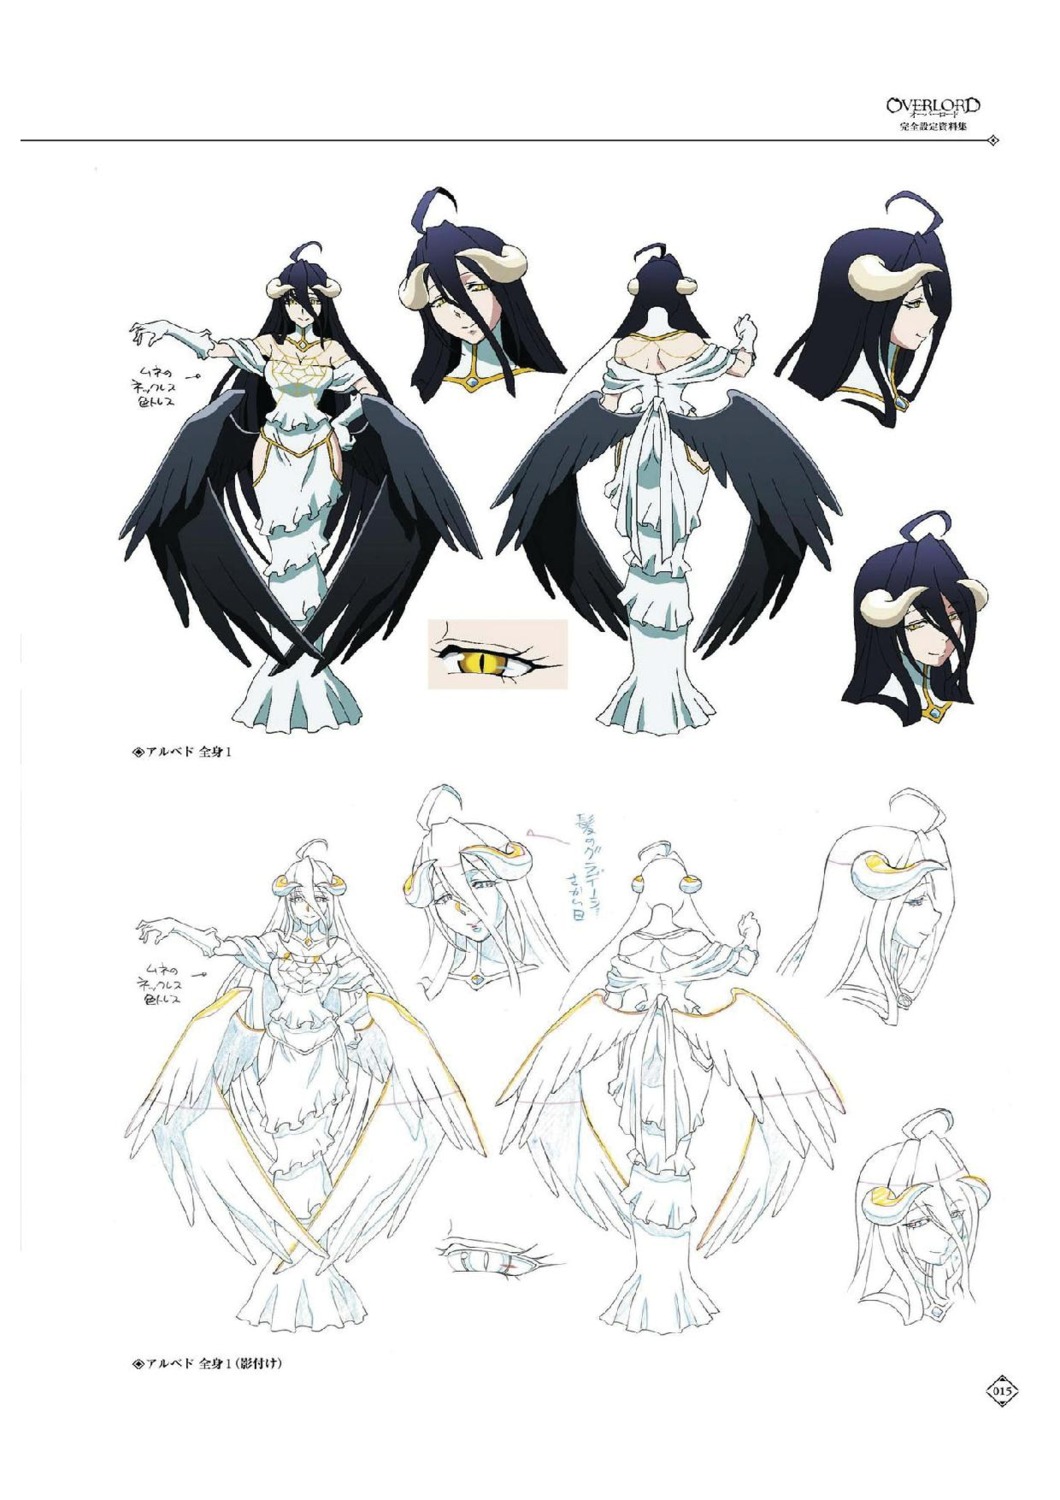 Overlord Albedo Overlord me Yande Re